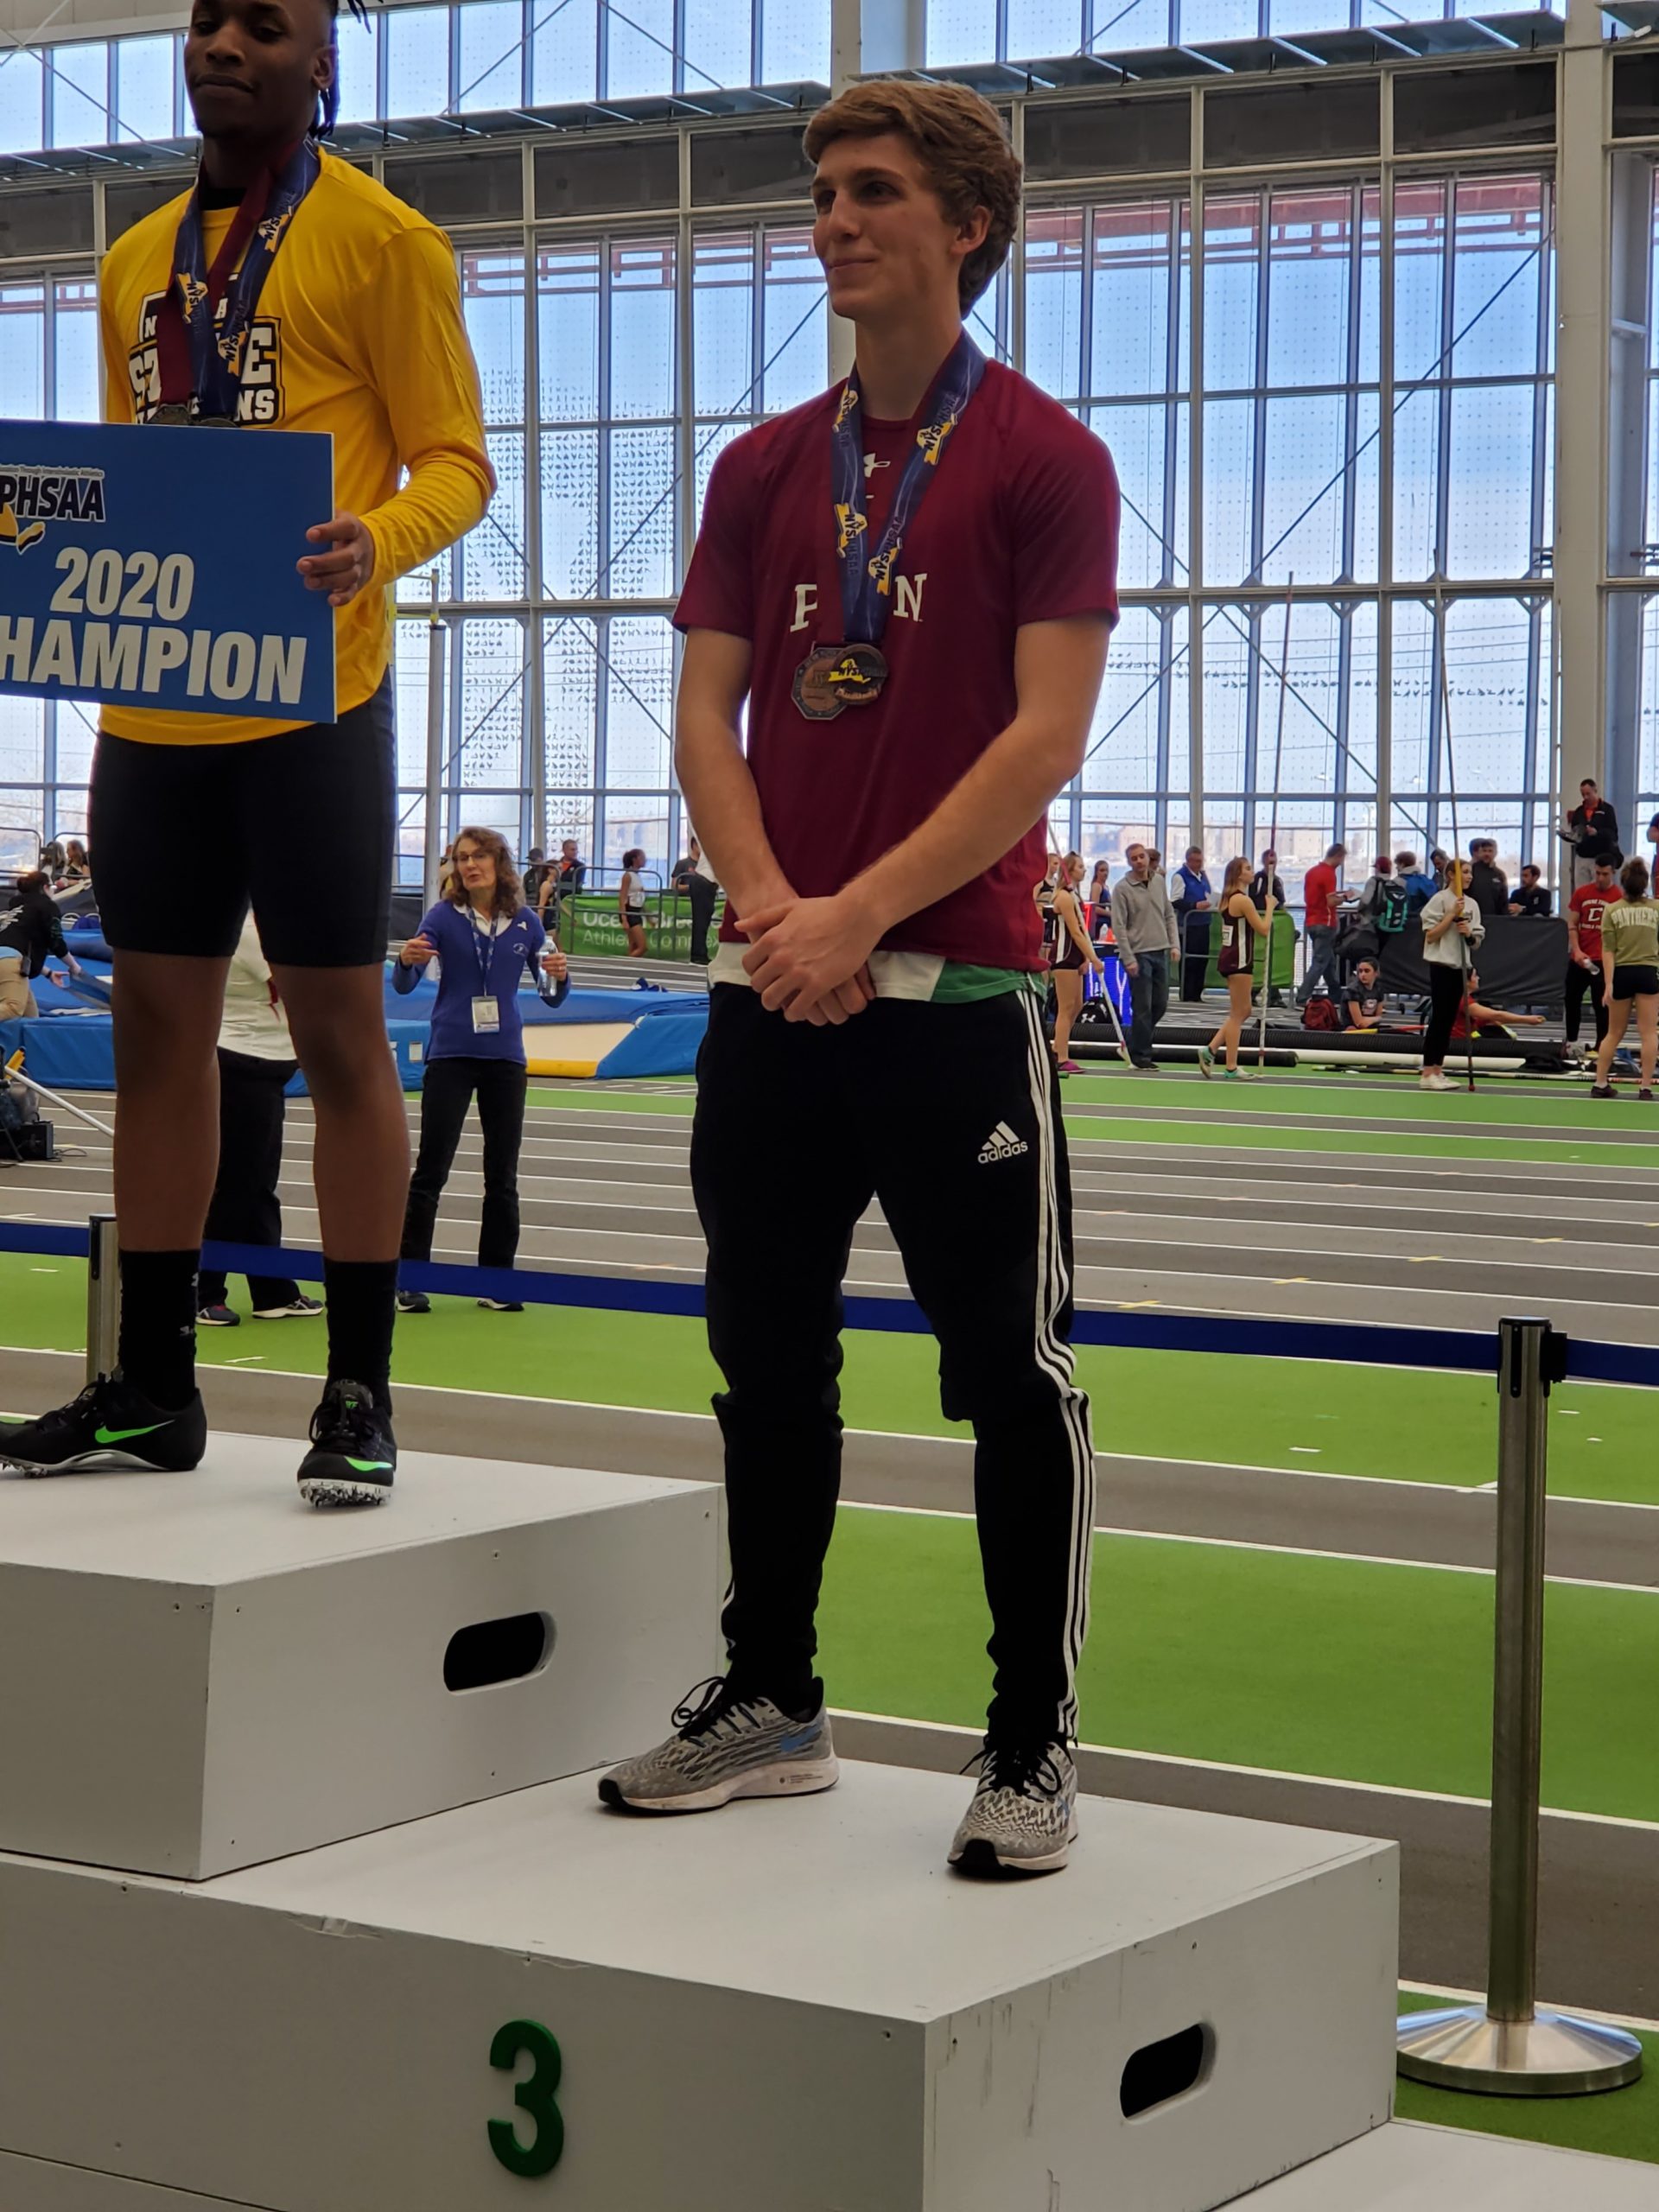 Westhampton Beach senior Jack Meigel earned a pair of bronze medals for placing third in the state in the high jump.